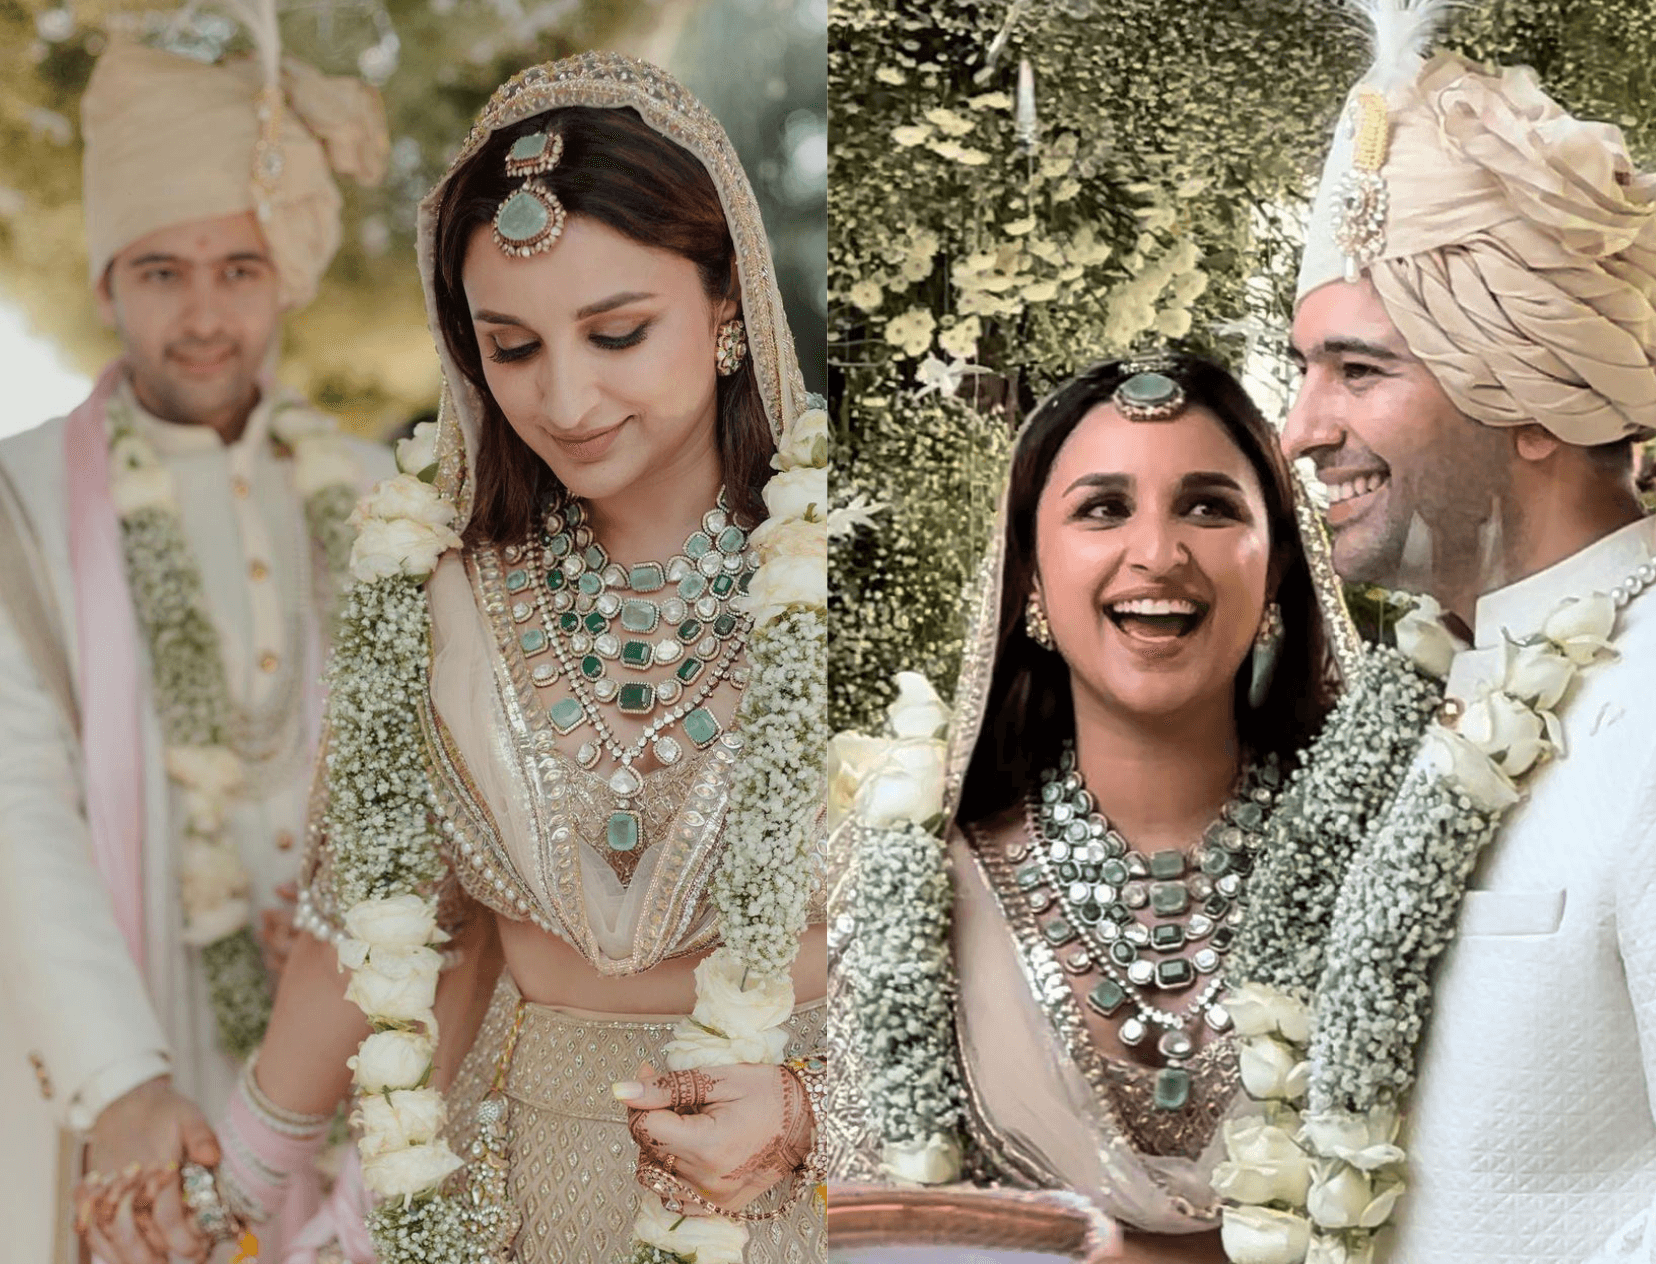 From Bridal Entry To Couple Dance, All The Inside Videos From Parineeti &amp; Raghav&#8217;s Wedding